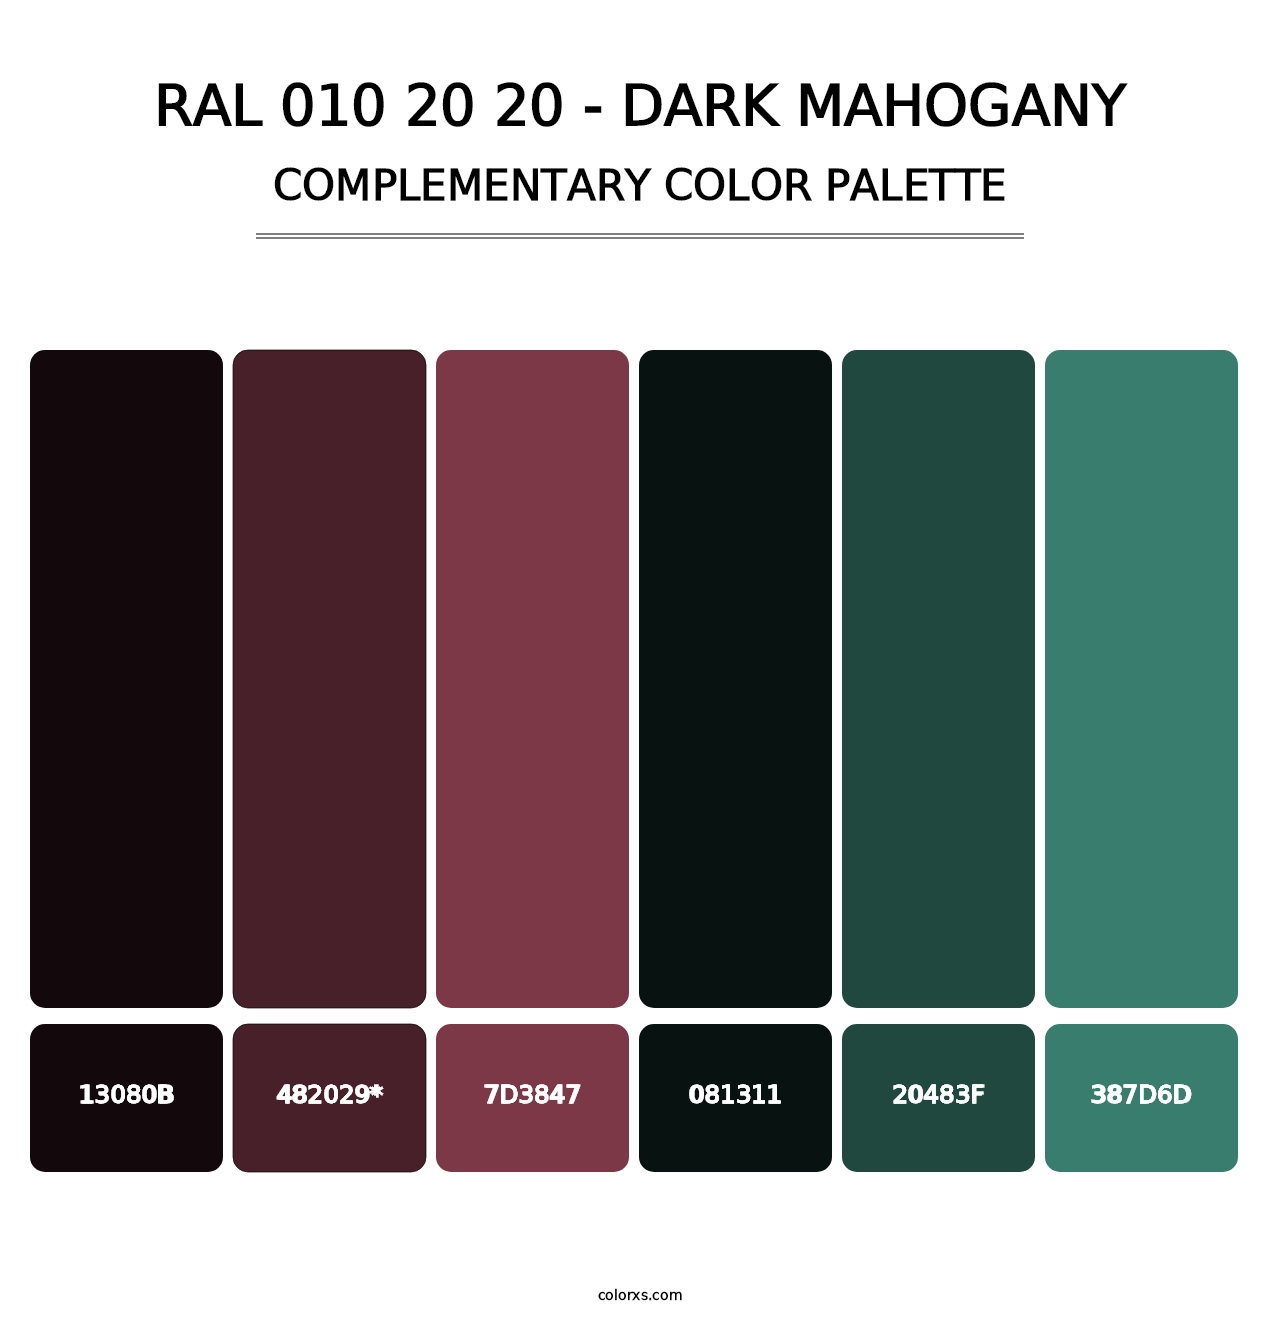 RAL 010 20 20 - Dark Mahogany - Complementary Color Palette